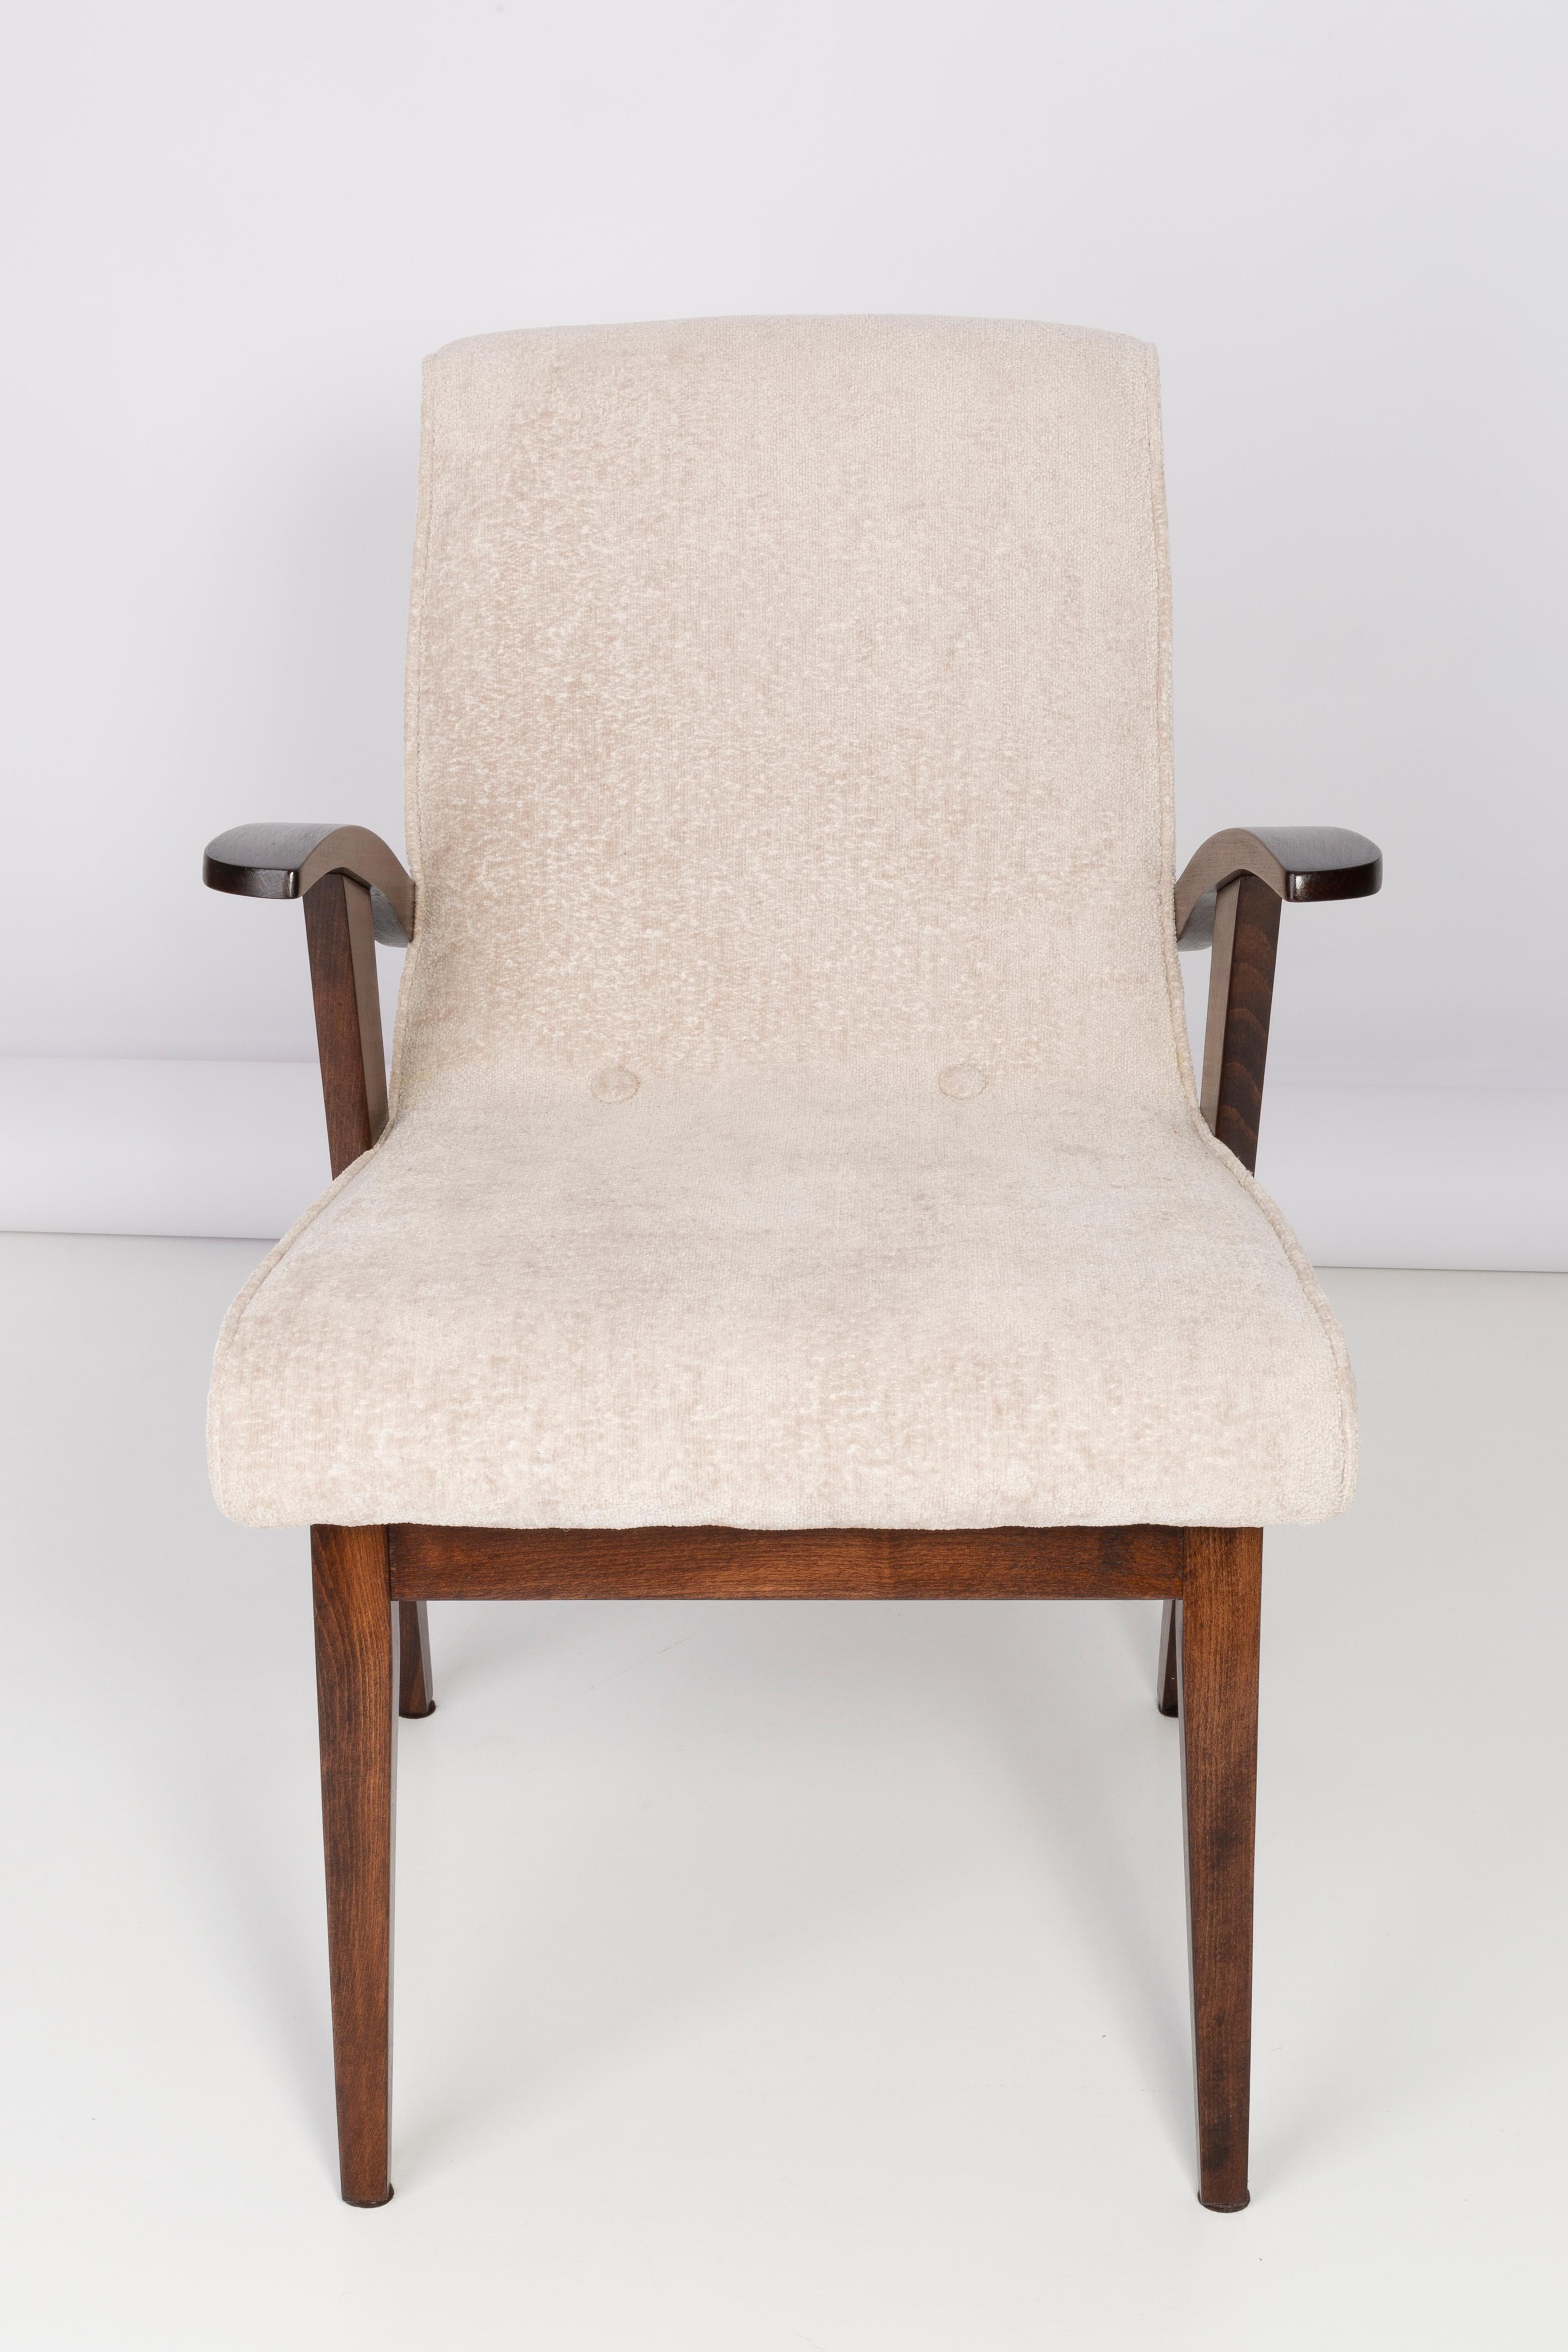 Armchair designed by Mieczyslaw Puchala in a Classic edition. Medium brown wood combined with a light cream bouclé fabric gives it elegance and nobility. The chair has undergone a full carpentry and upholstery renovation. The wood is in excellent